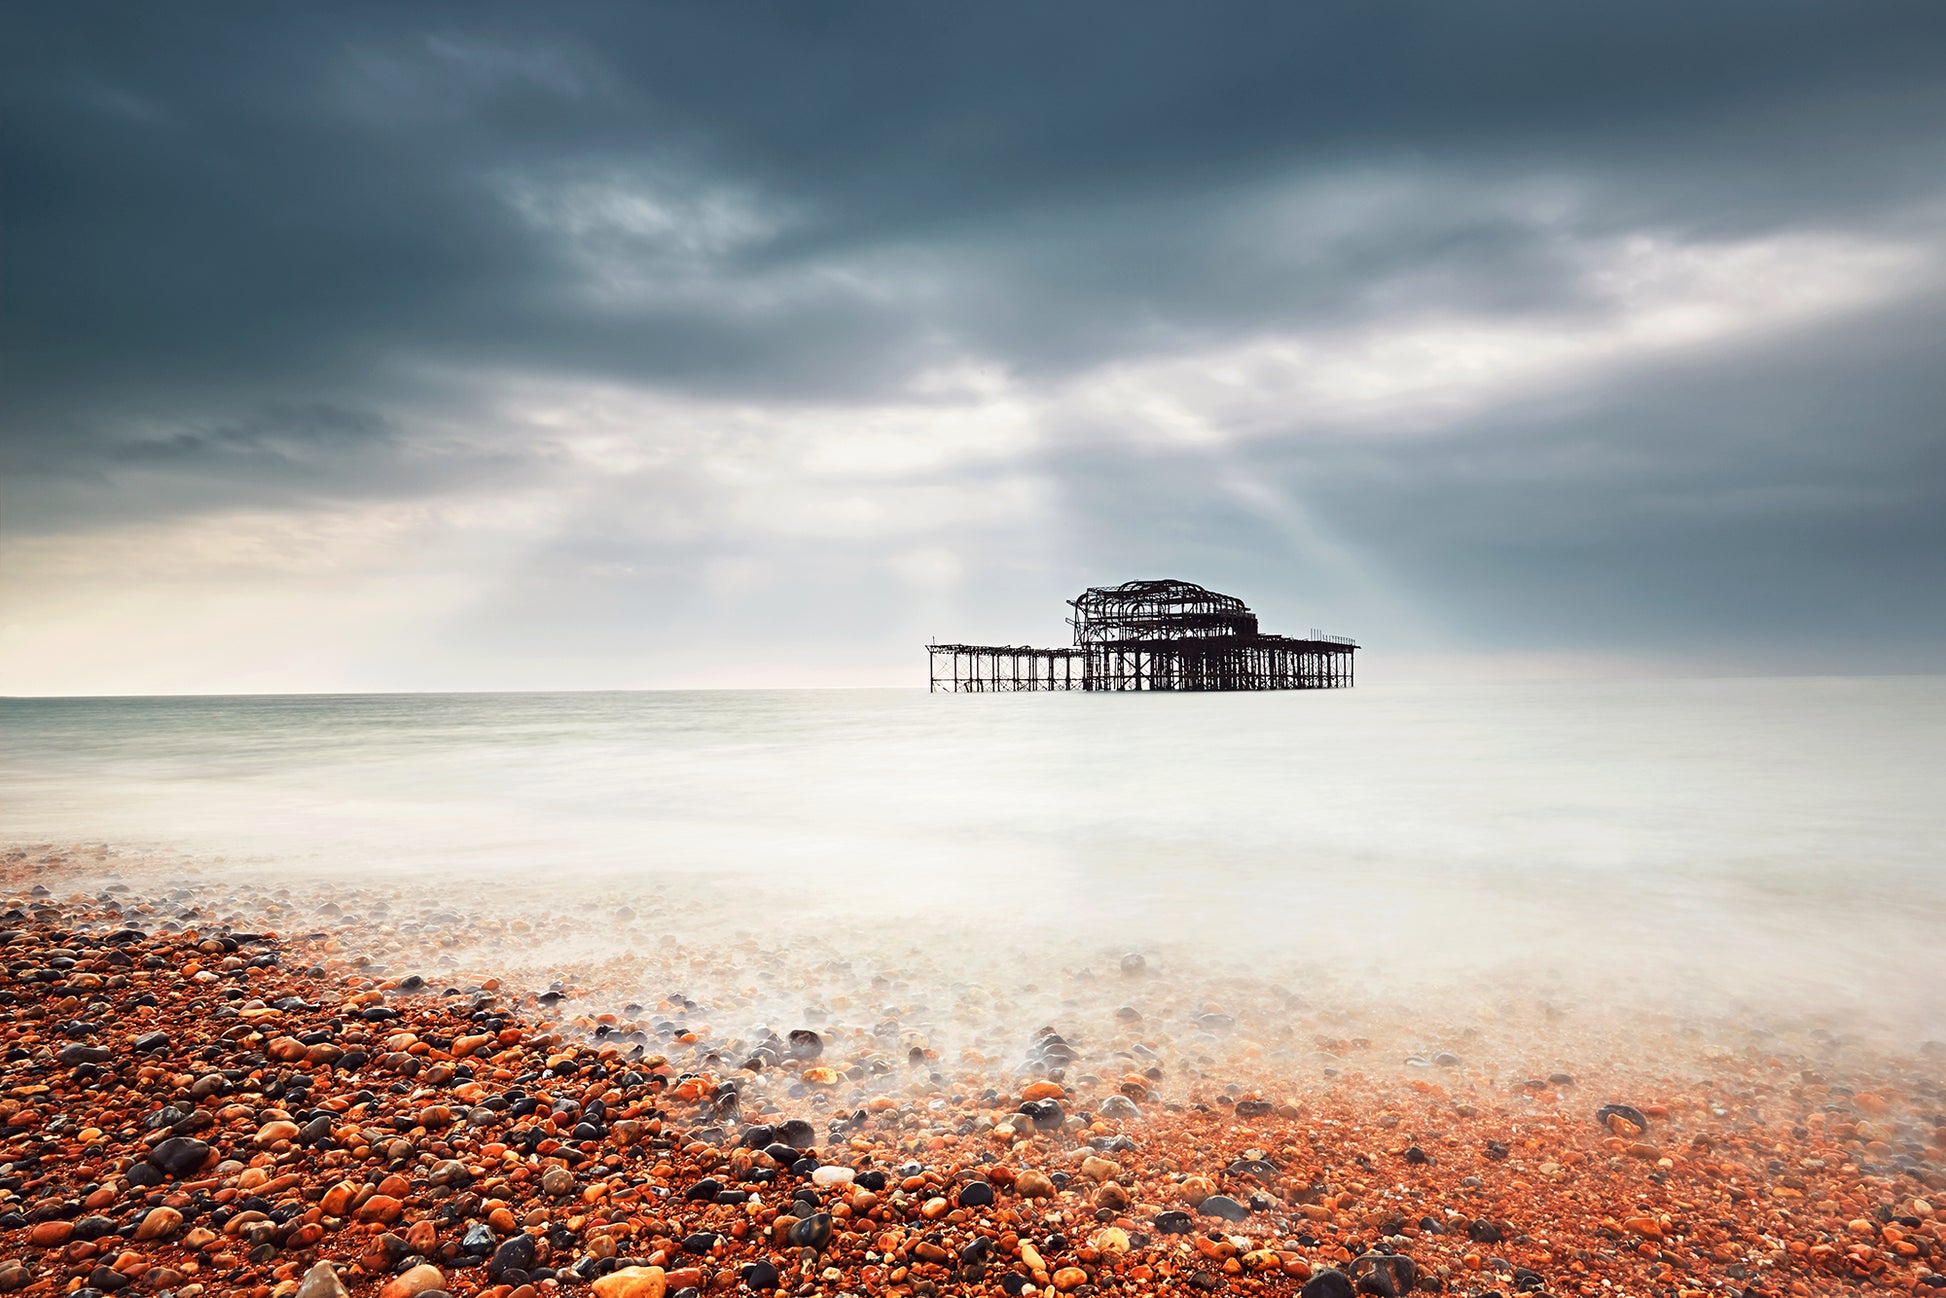 Wall Art And Prints: Abandoned West Pier Vintage Gentle Touch Effect - Beach / Seascape / Nature / Landscape Photo Canvas Wall Art Print - Wall Decor - Artwork